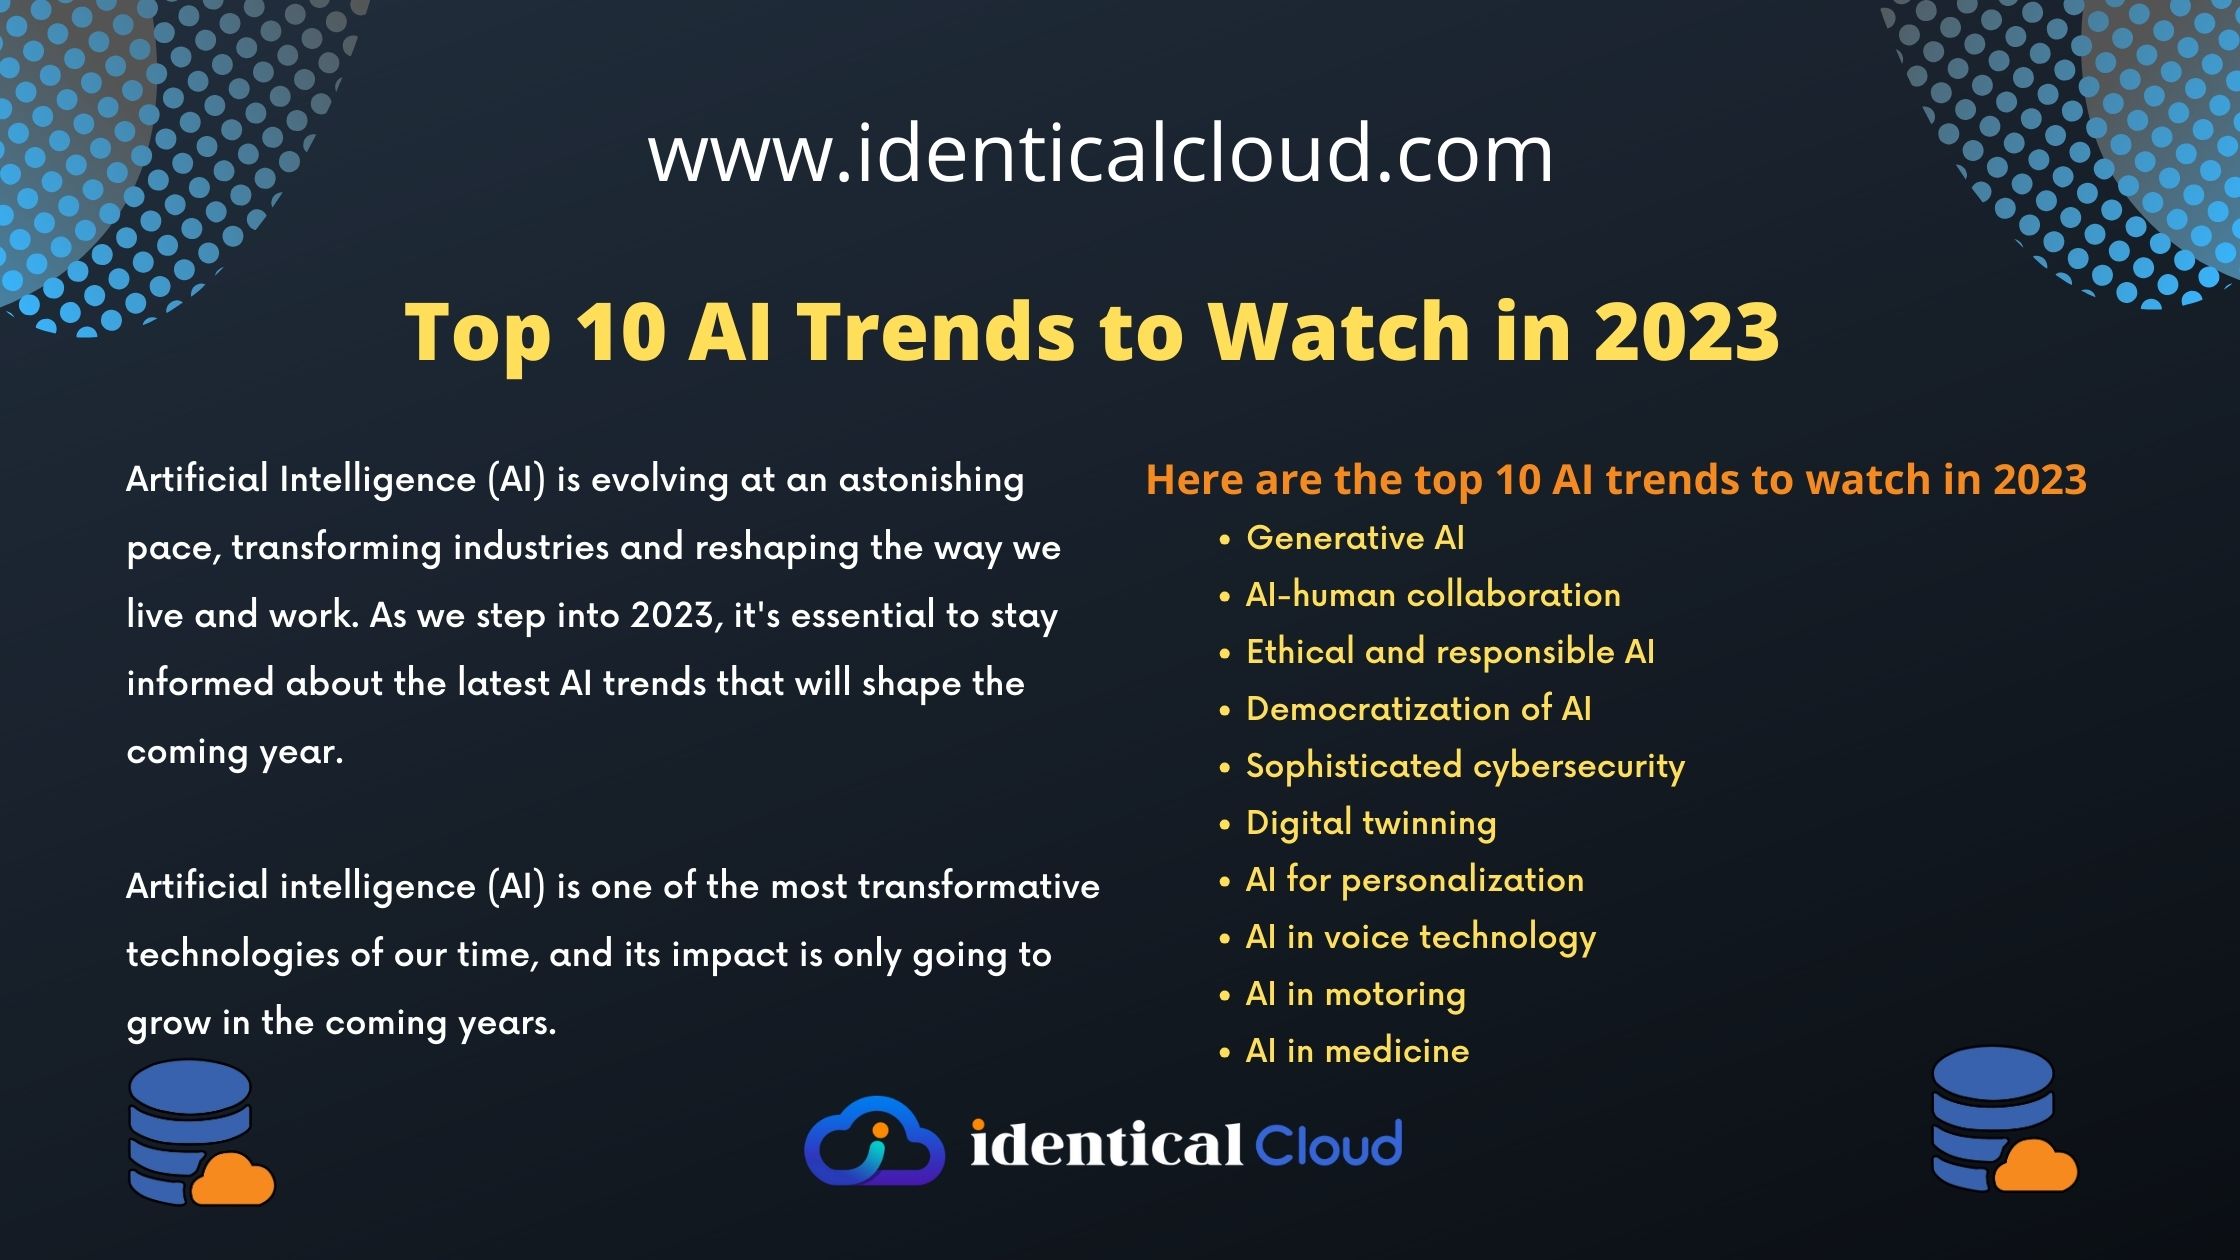 Top 10 AI Trends to Watch in 2023 - identicalcloud.com